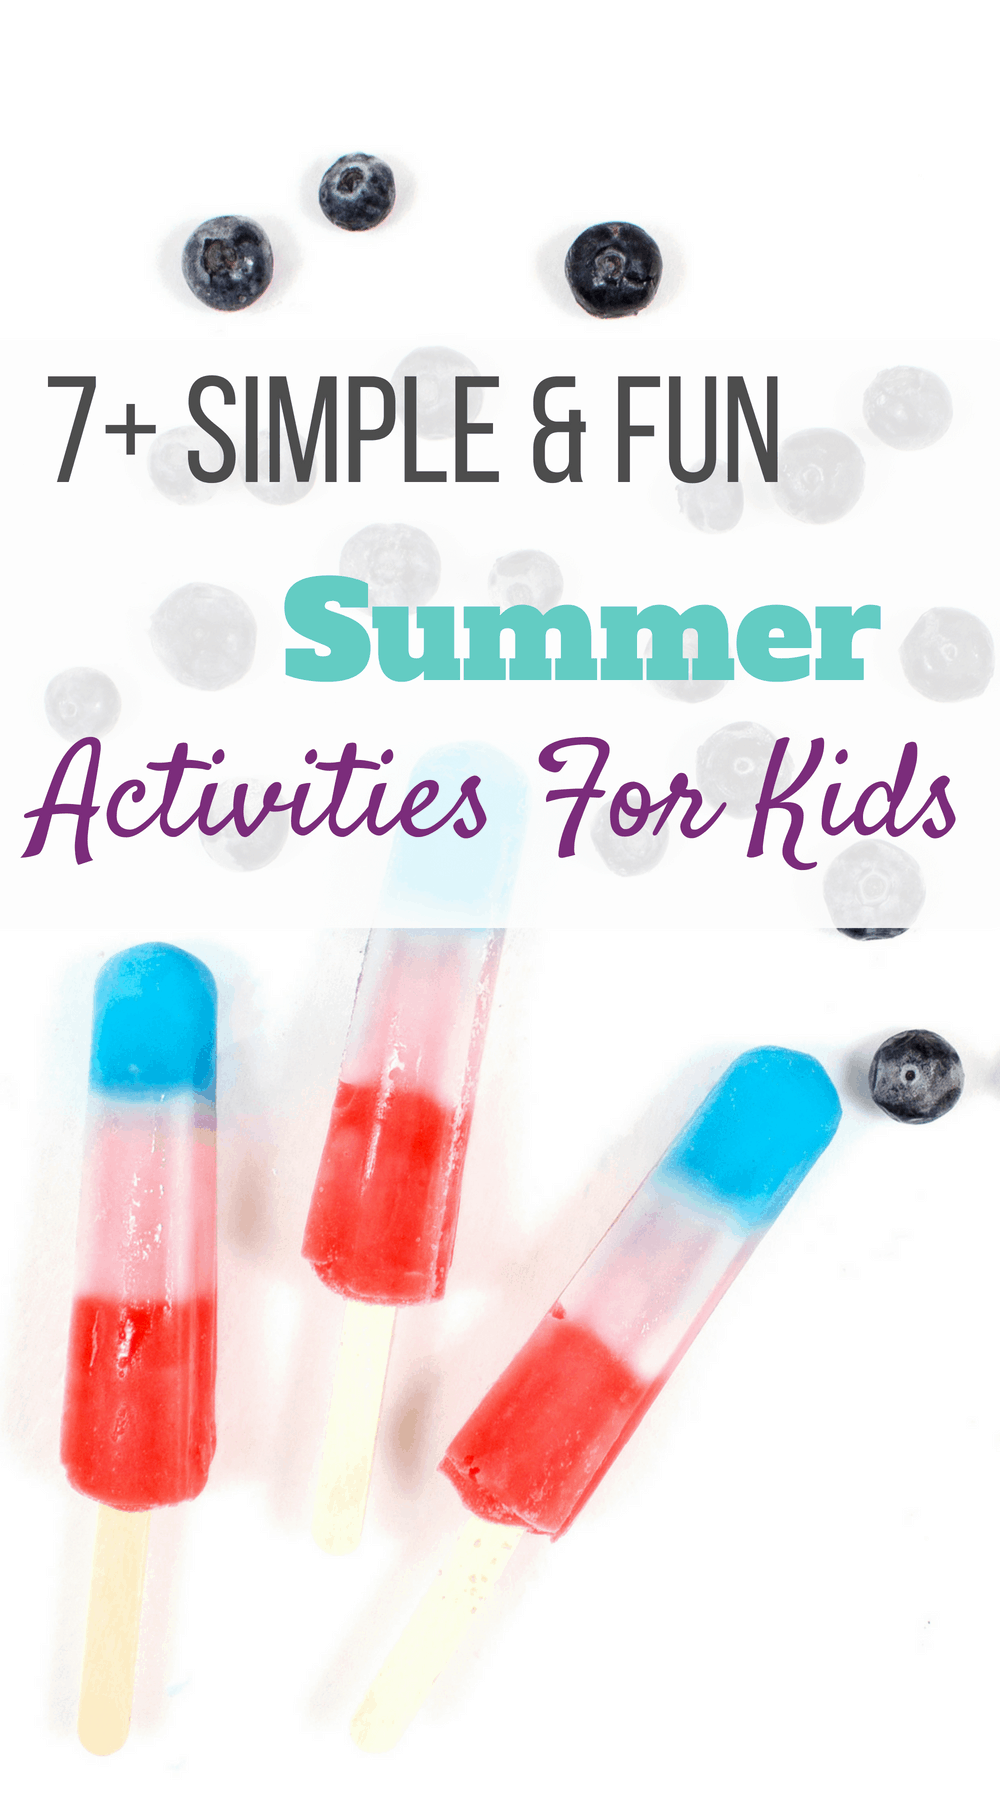 7+ Simple and Fun Summer Activities For Kids, kids summer activities, kids summer schedule, kids summer fun, fun summer activities at home, summer fun ideas, summer bucket list, kids summer bucket list, #kidssummeractivities #kidssummerfun #summerbucketlist